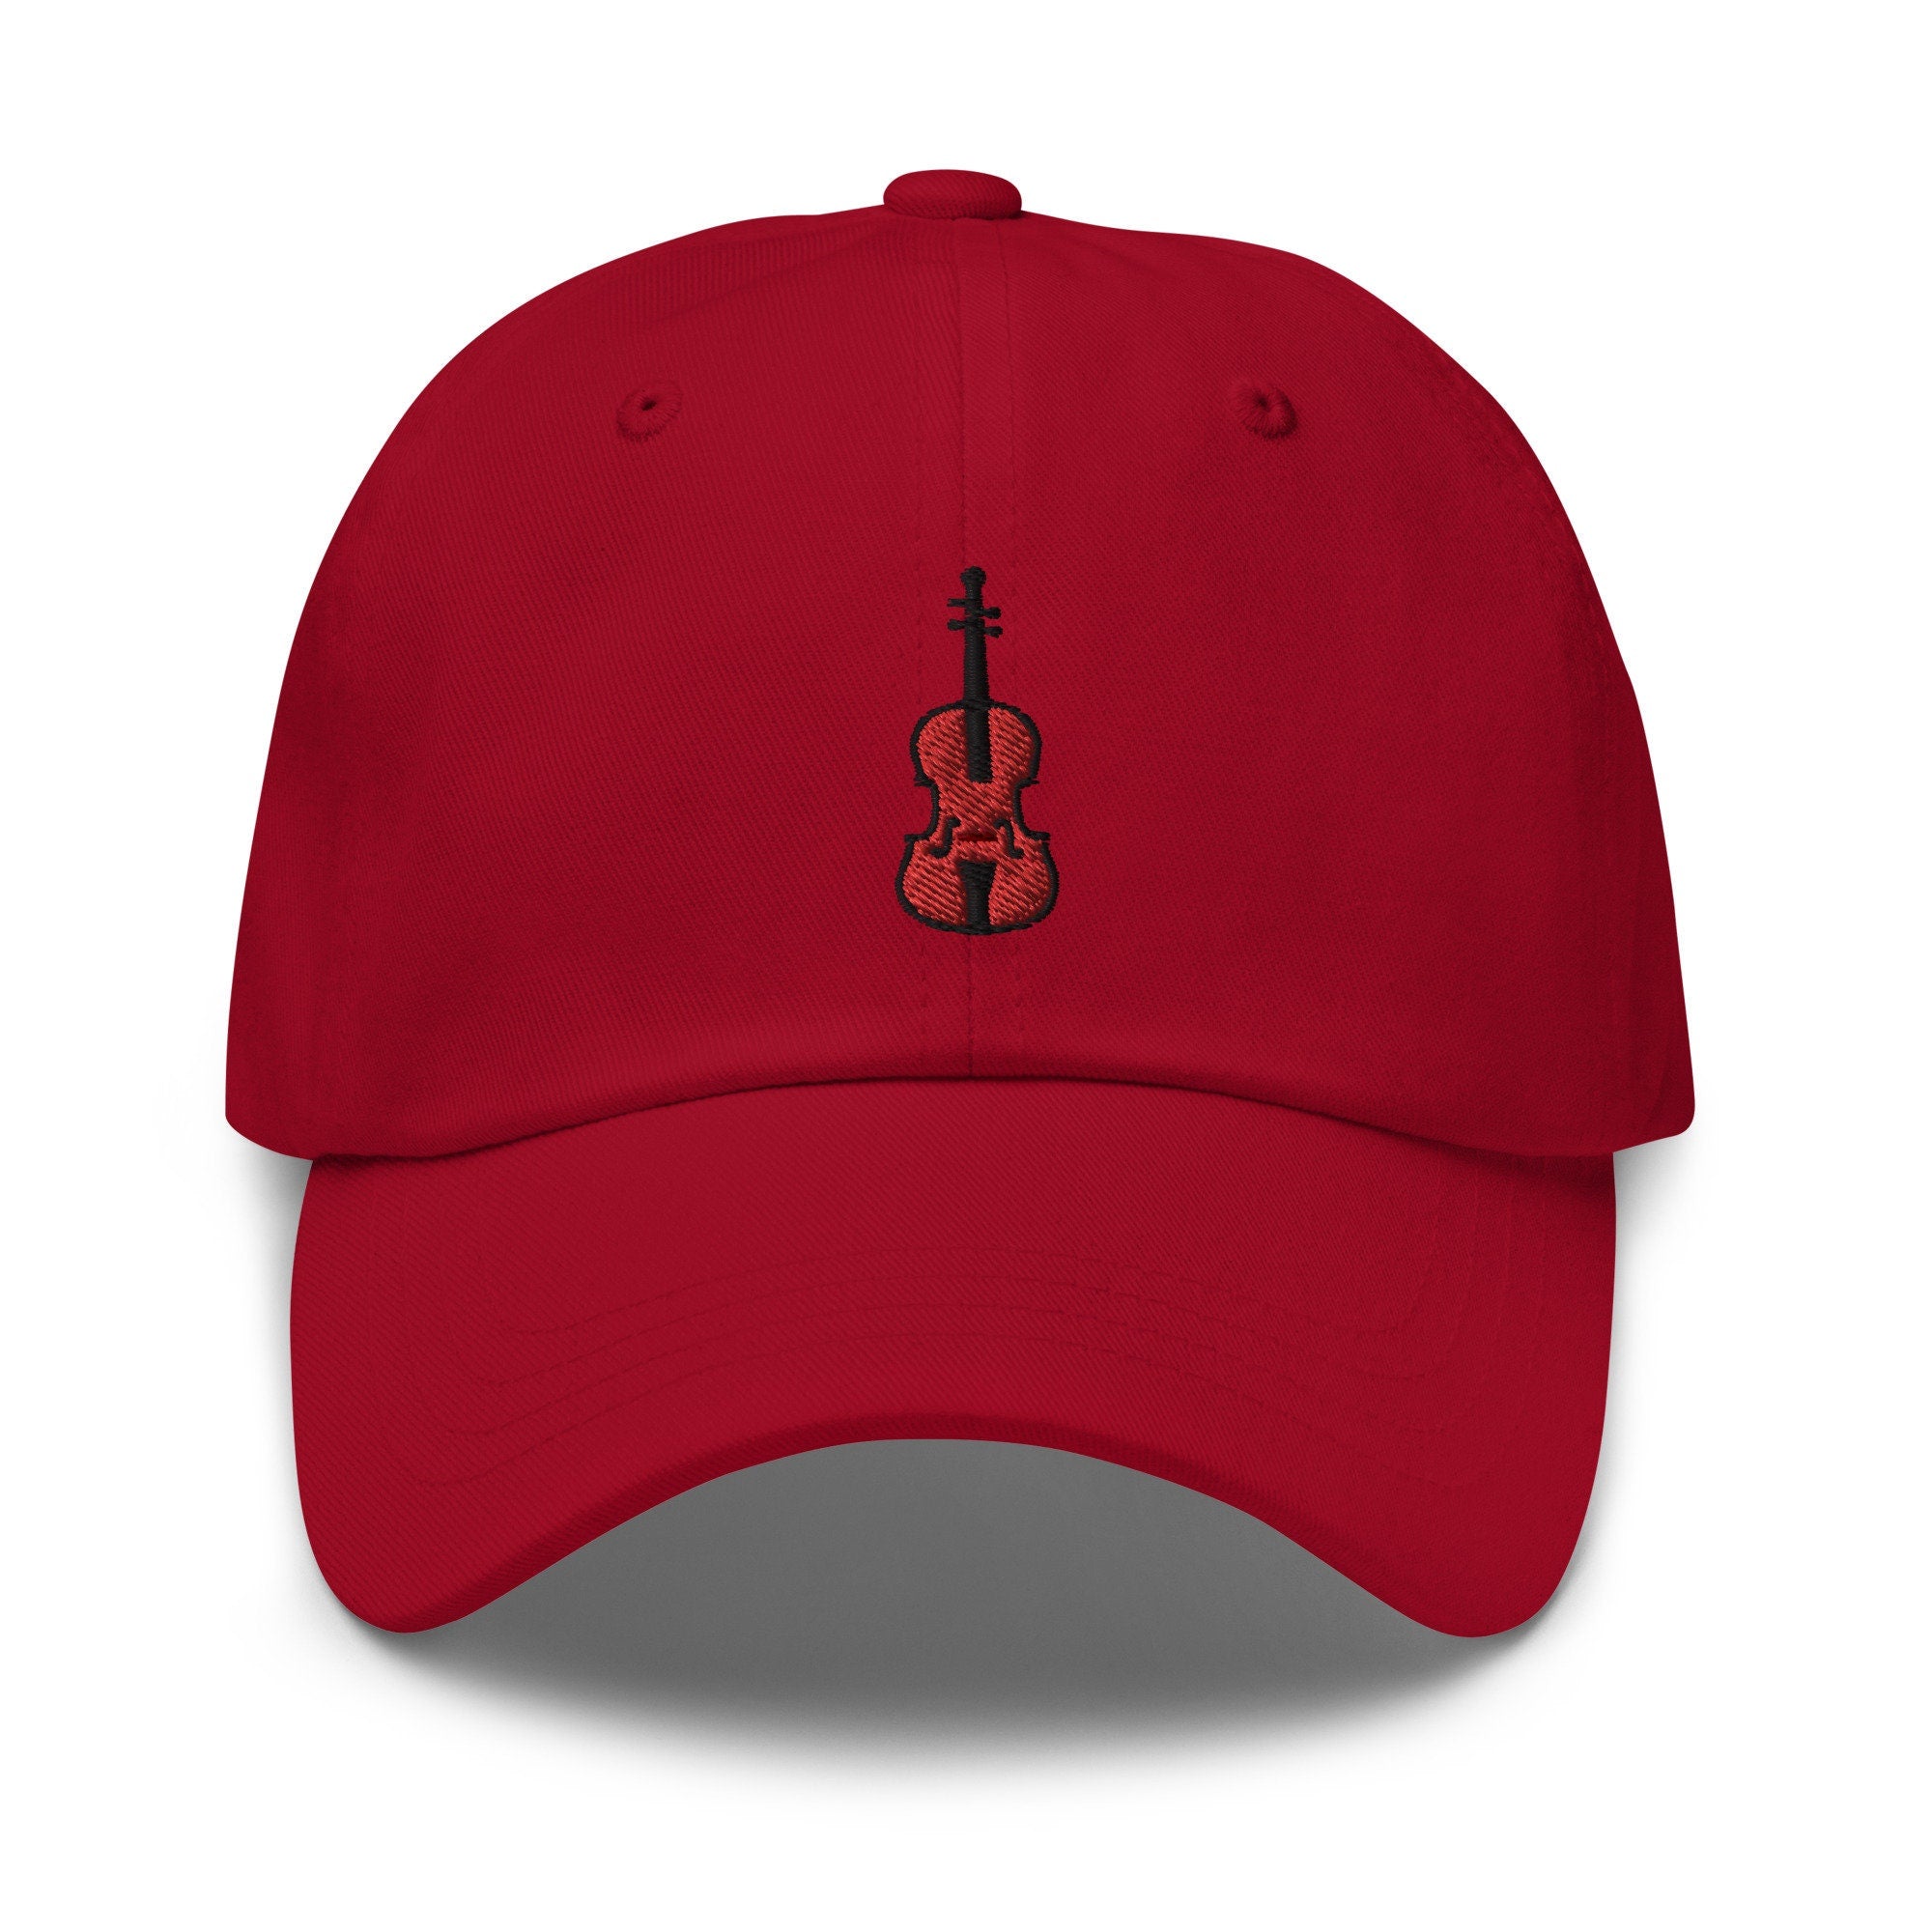 Cello Embroidered Dad Hat